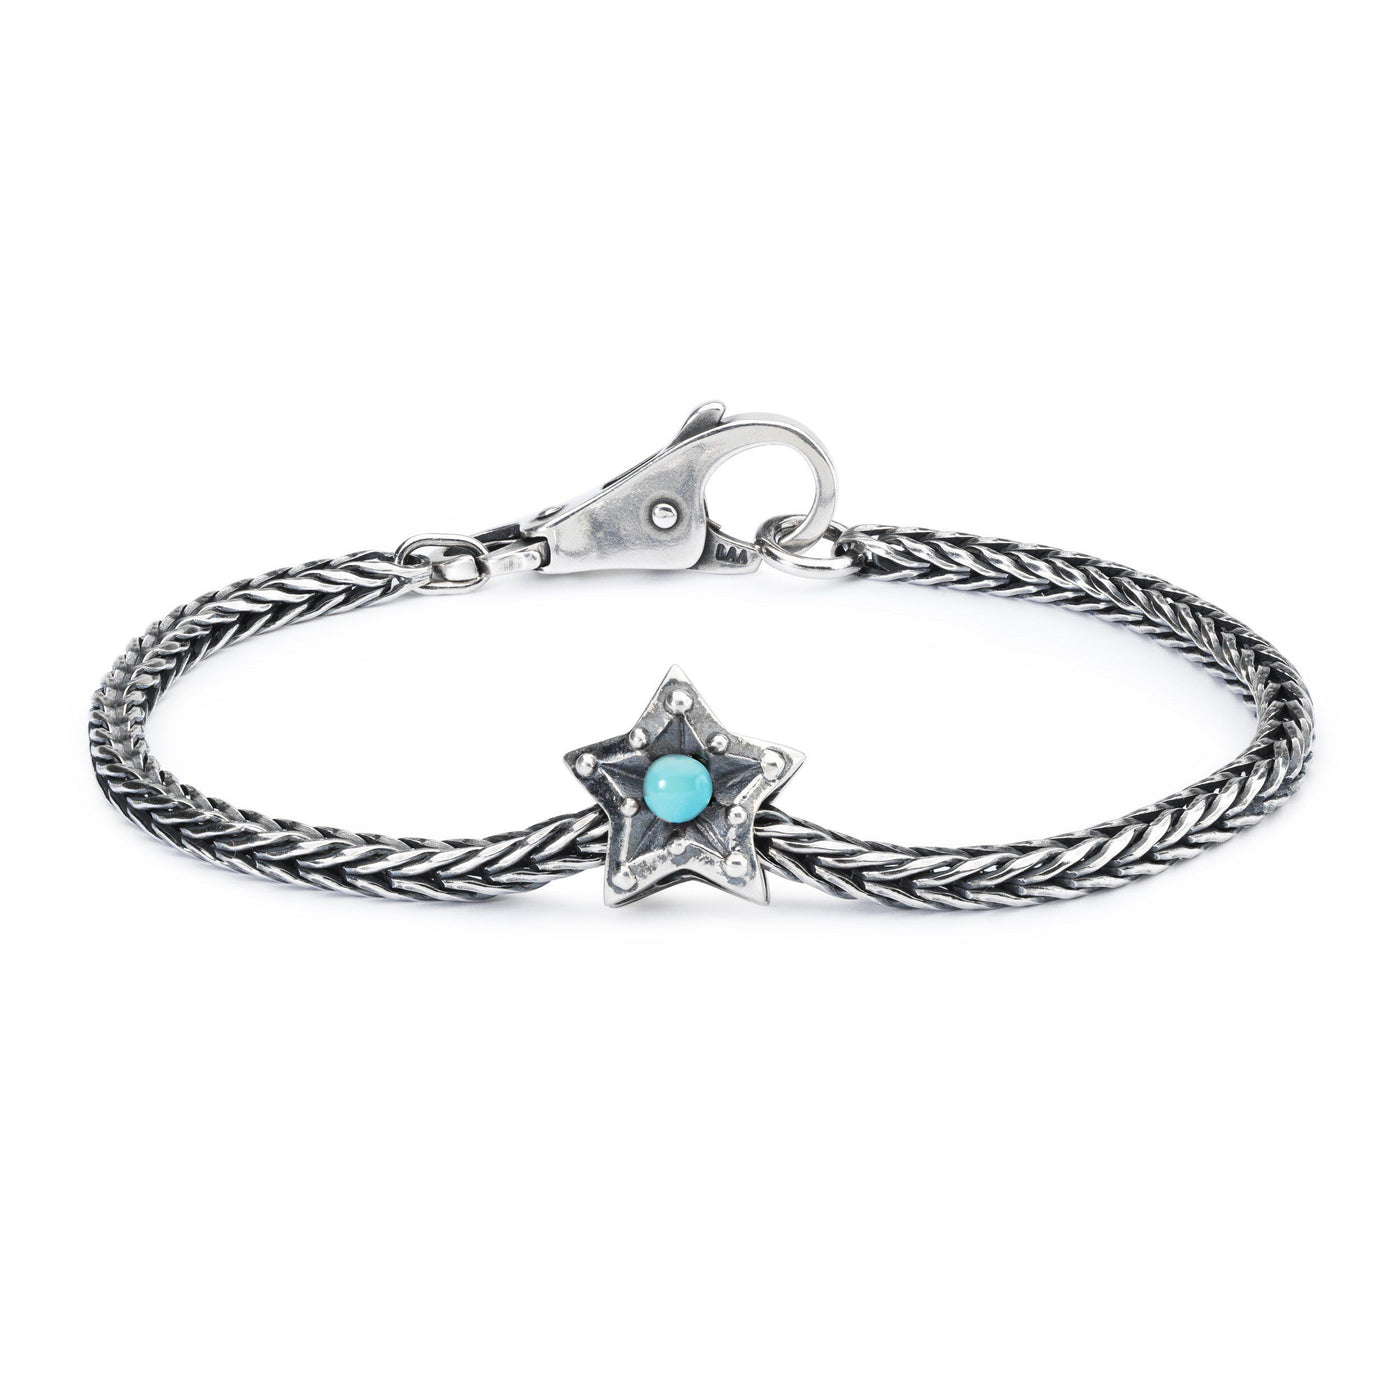 Star of Protection - Trollbeads Canada